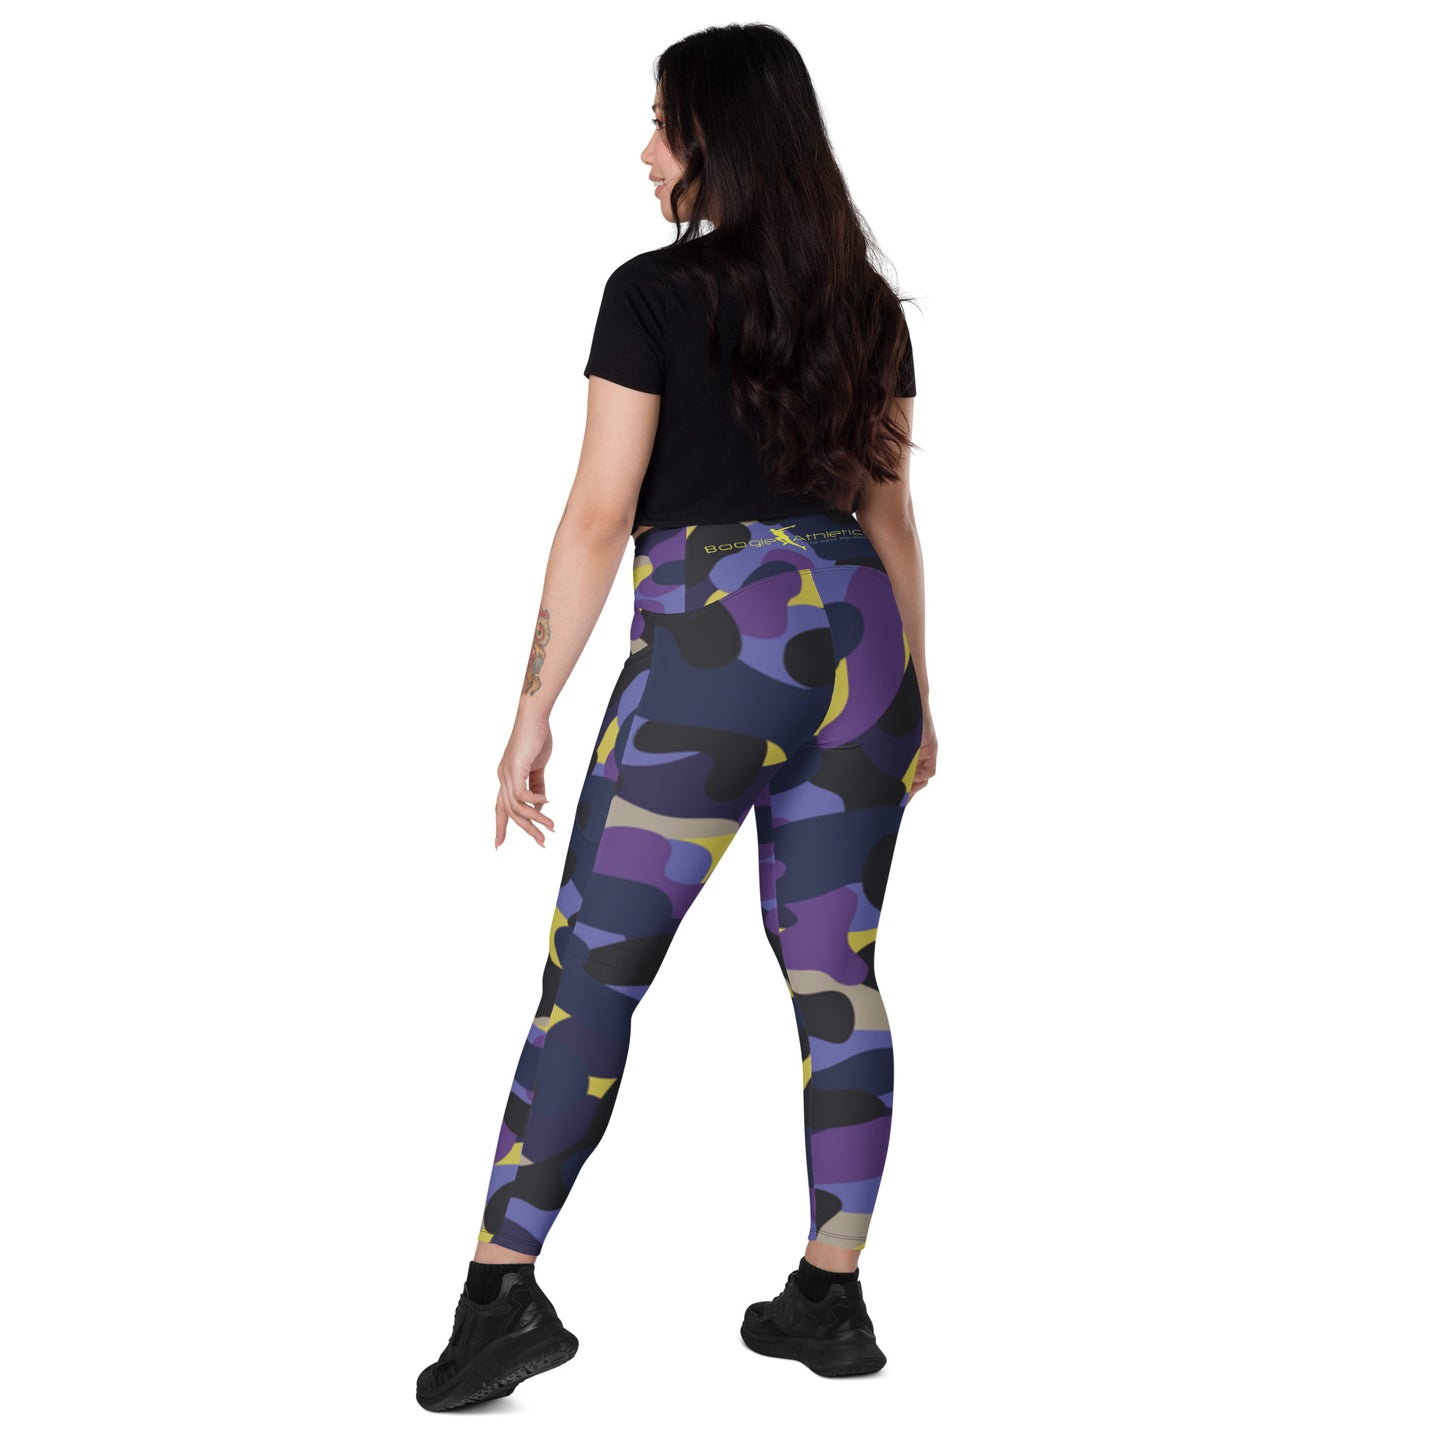 New!!! Leggings with pockets